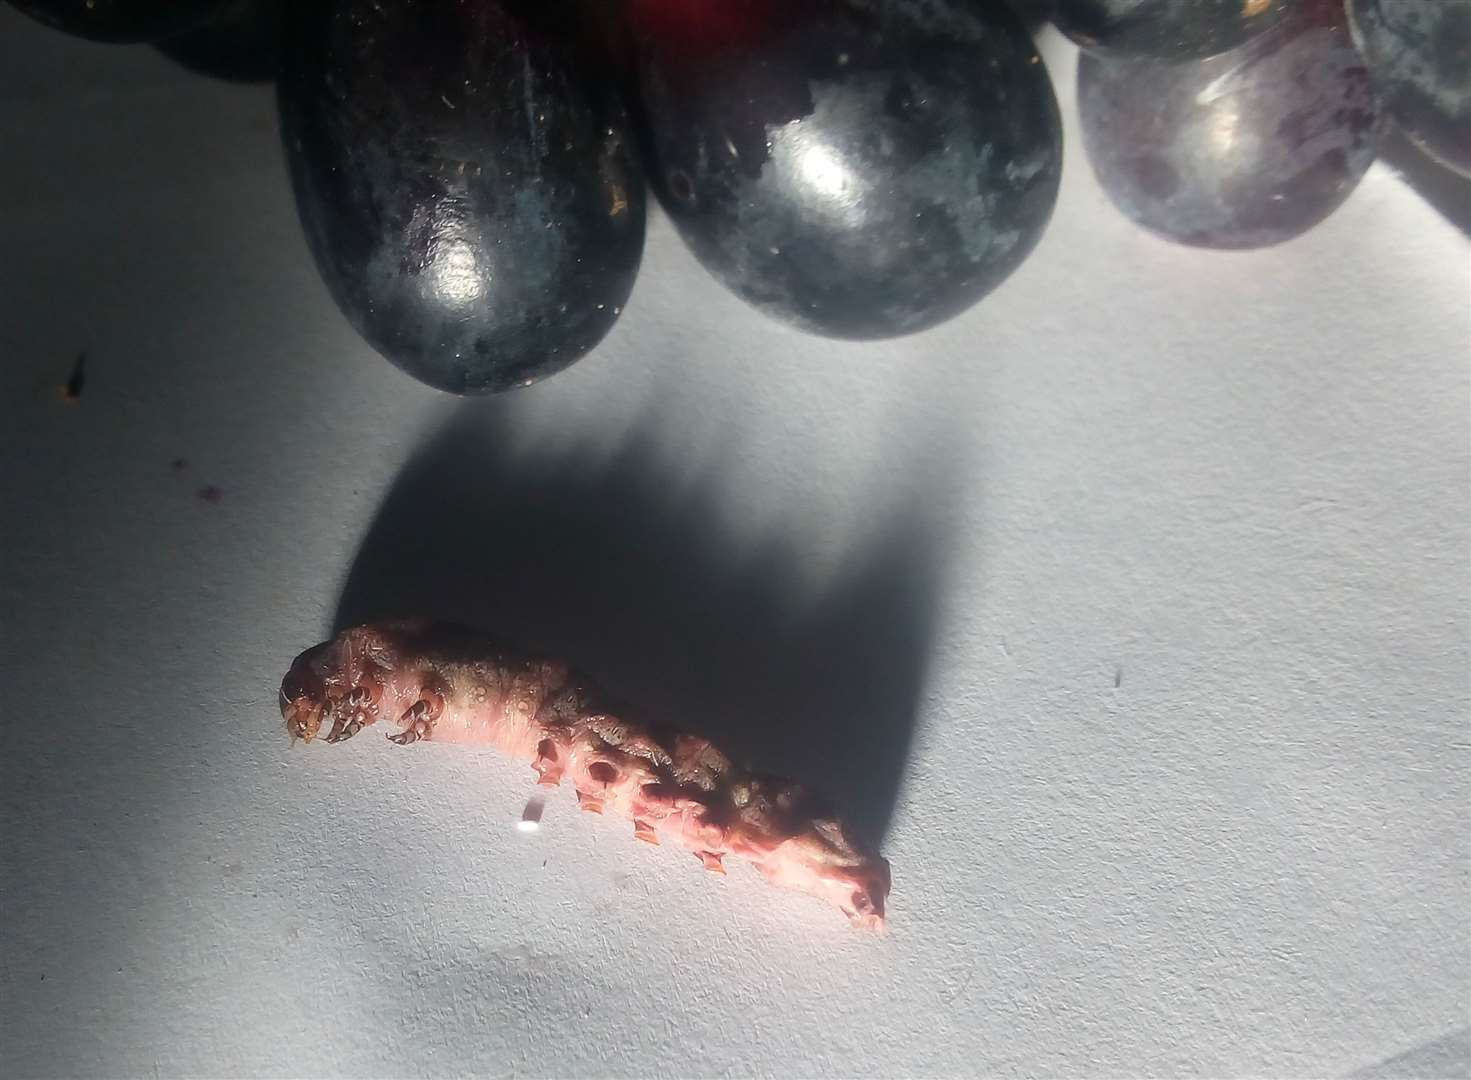 The caterpillar was found inside a packet of grapes